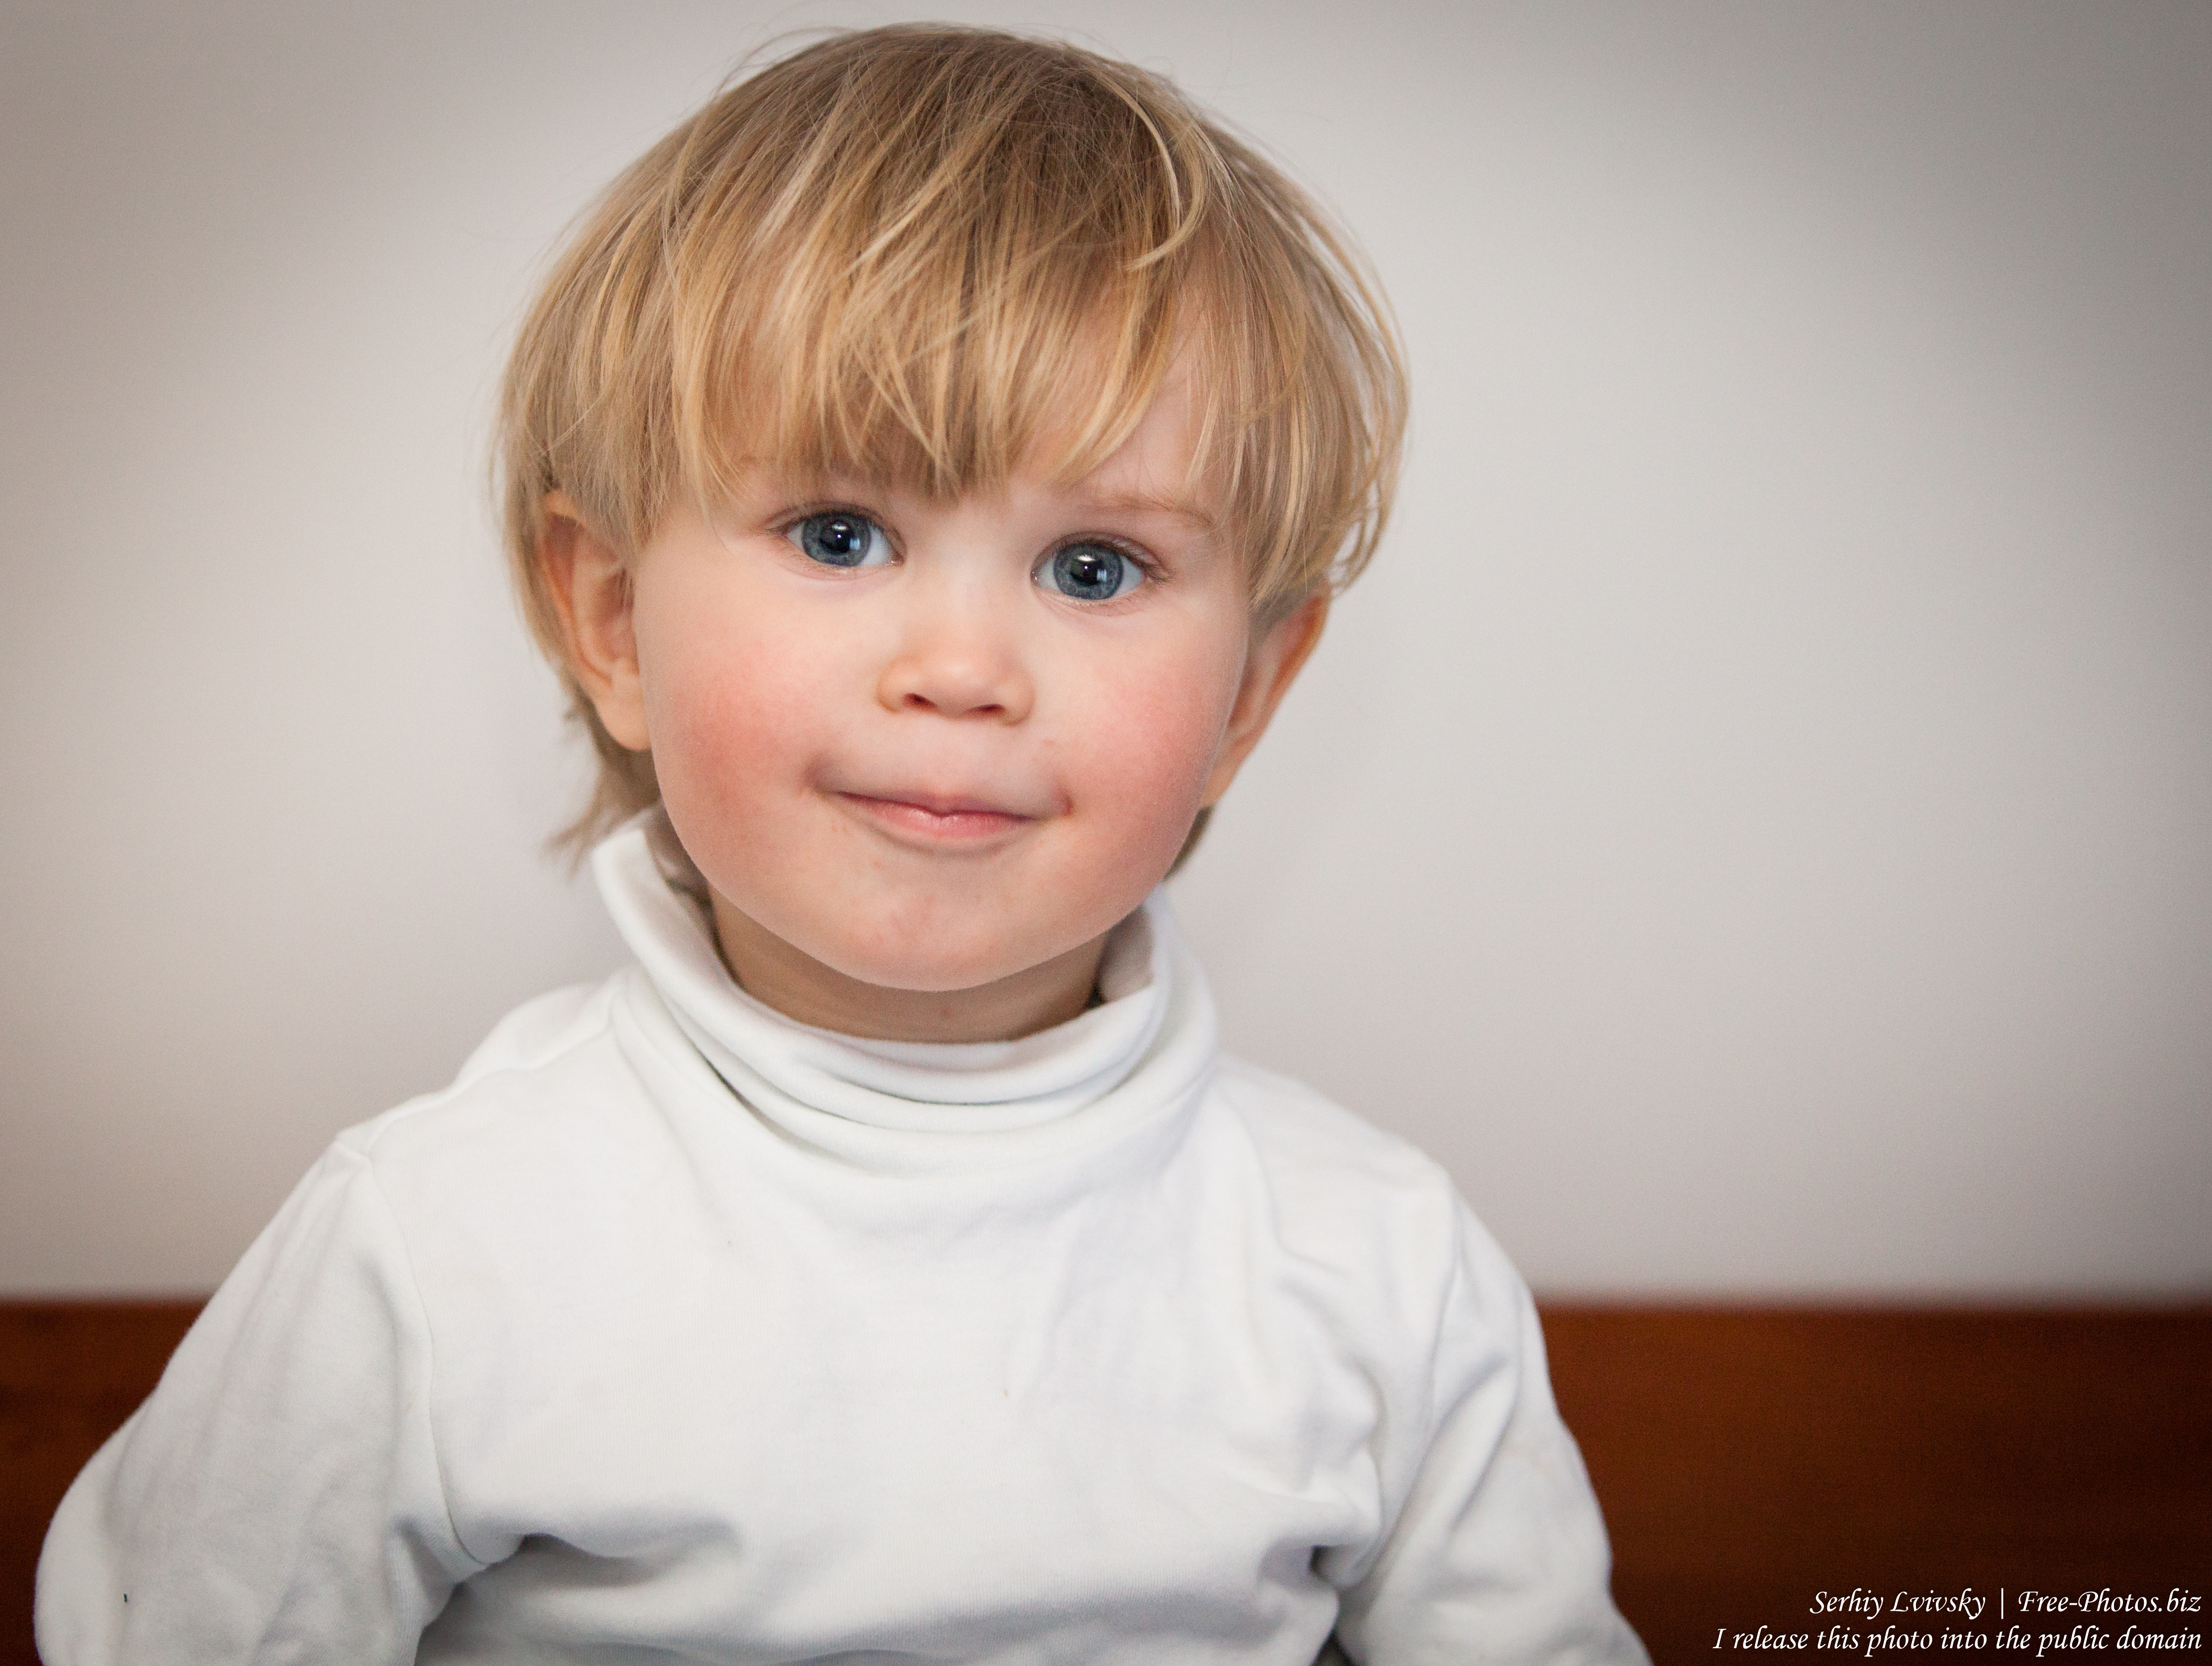 a Catholic baby boy photographed in March 2015